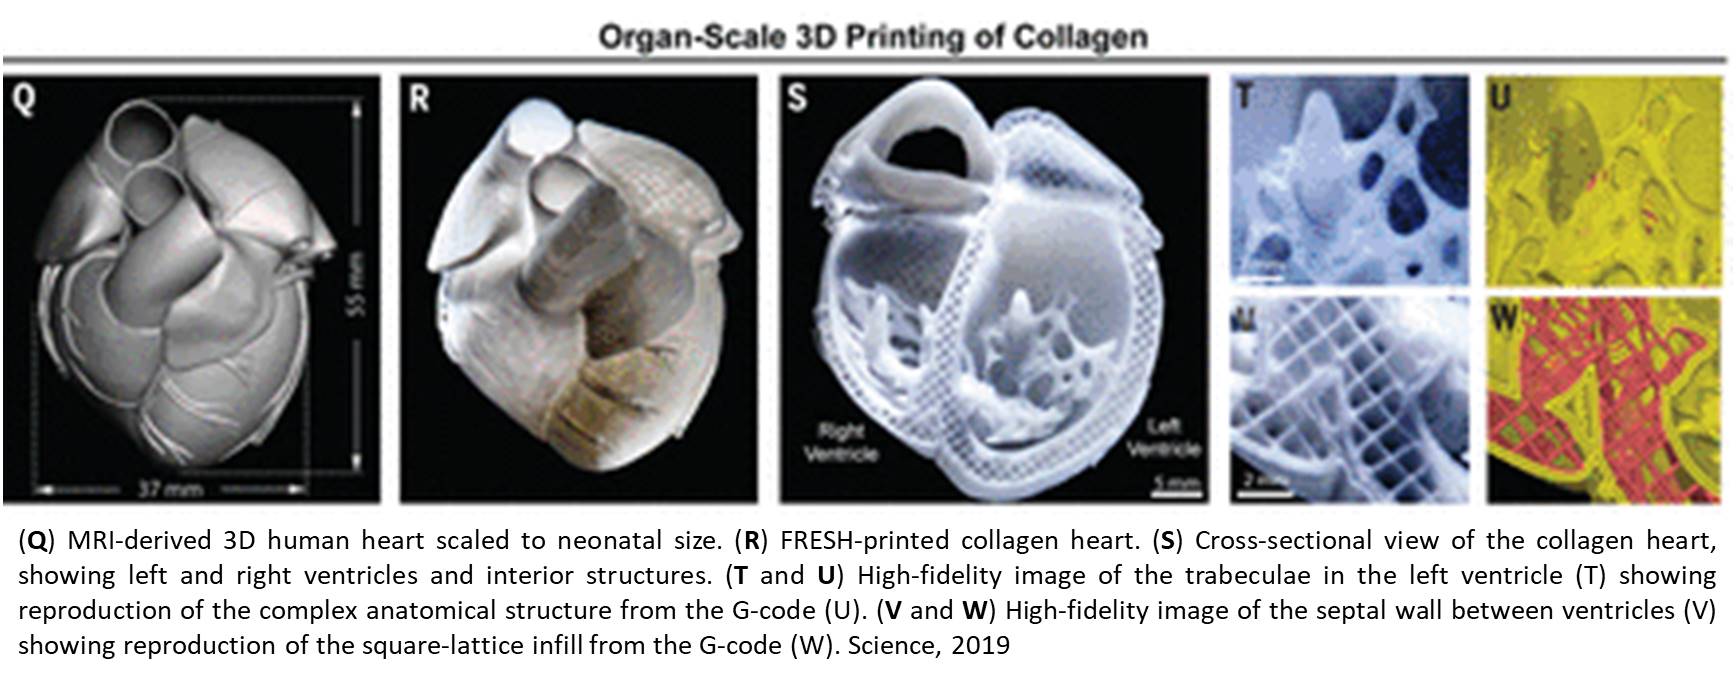 3D printing of human heart components using collagen